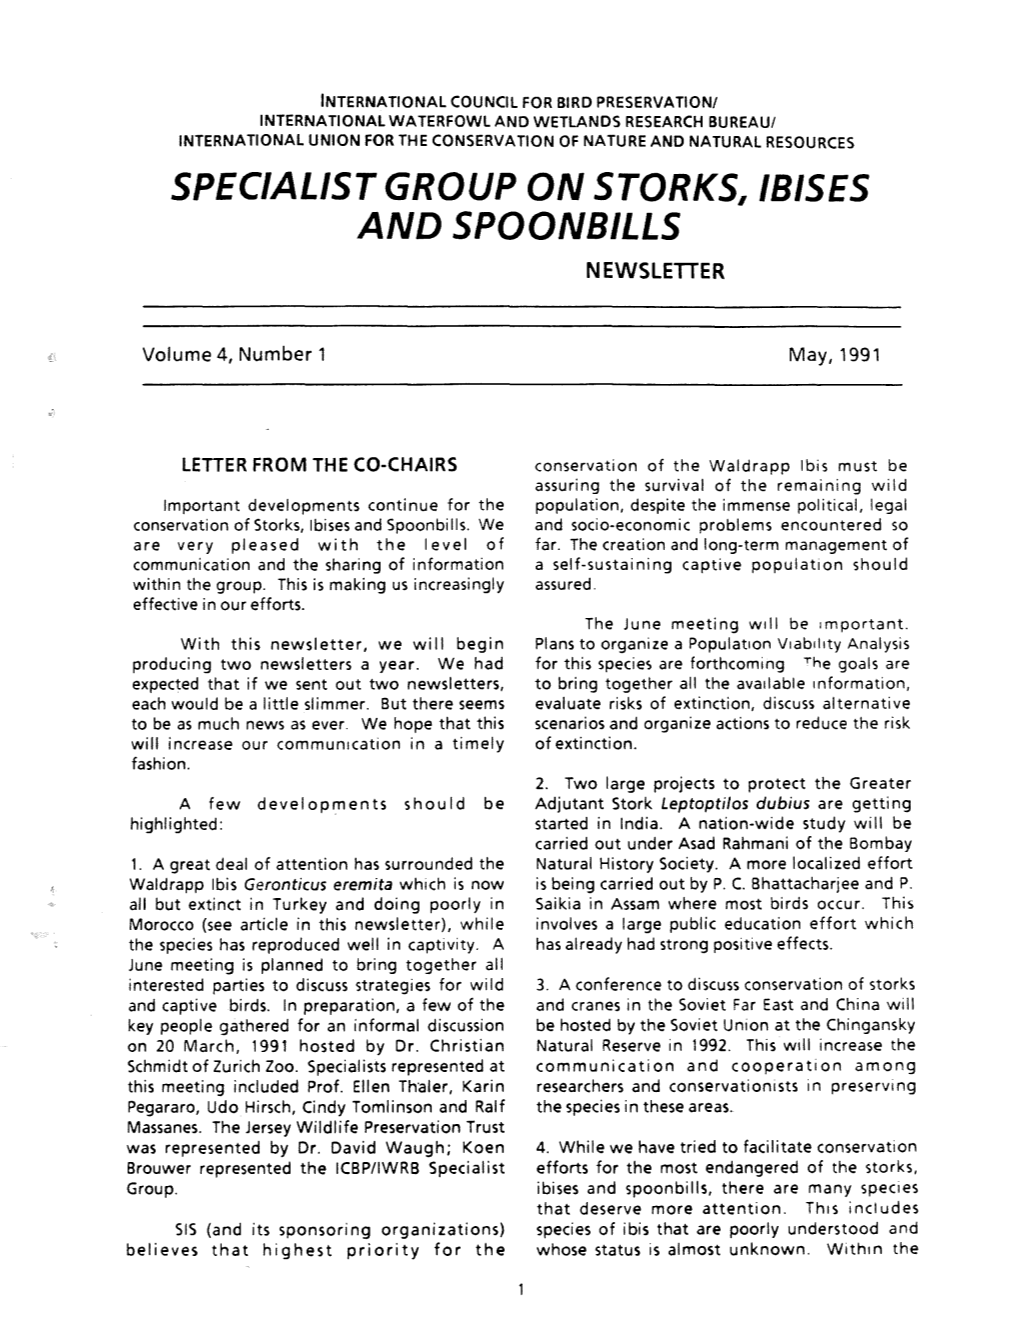 Specialist Group on Storks, Ibises and Spoonbills Newsletier